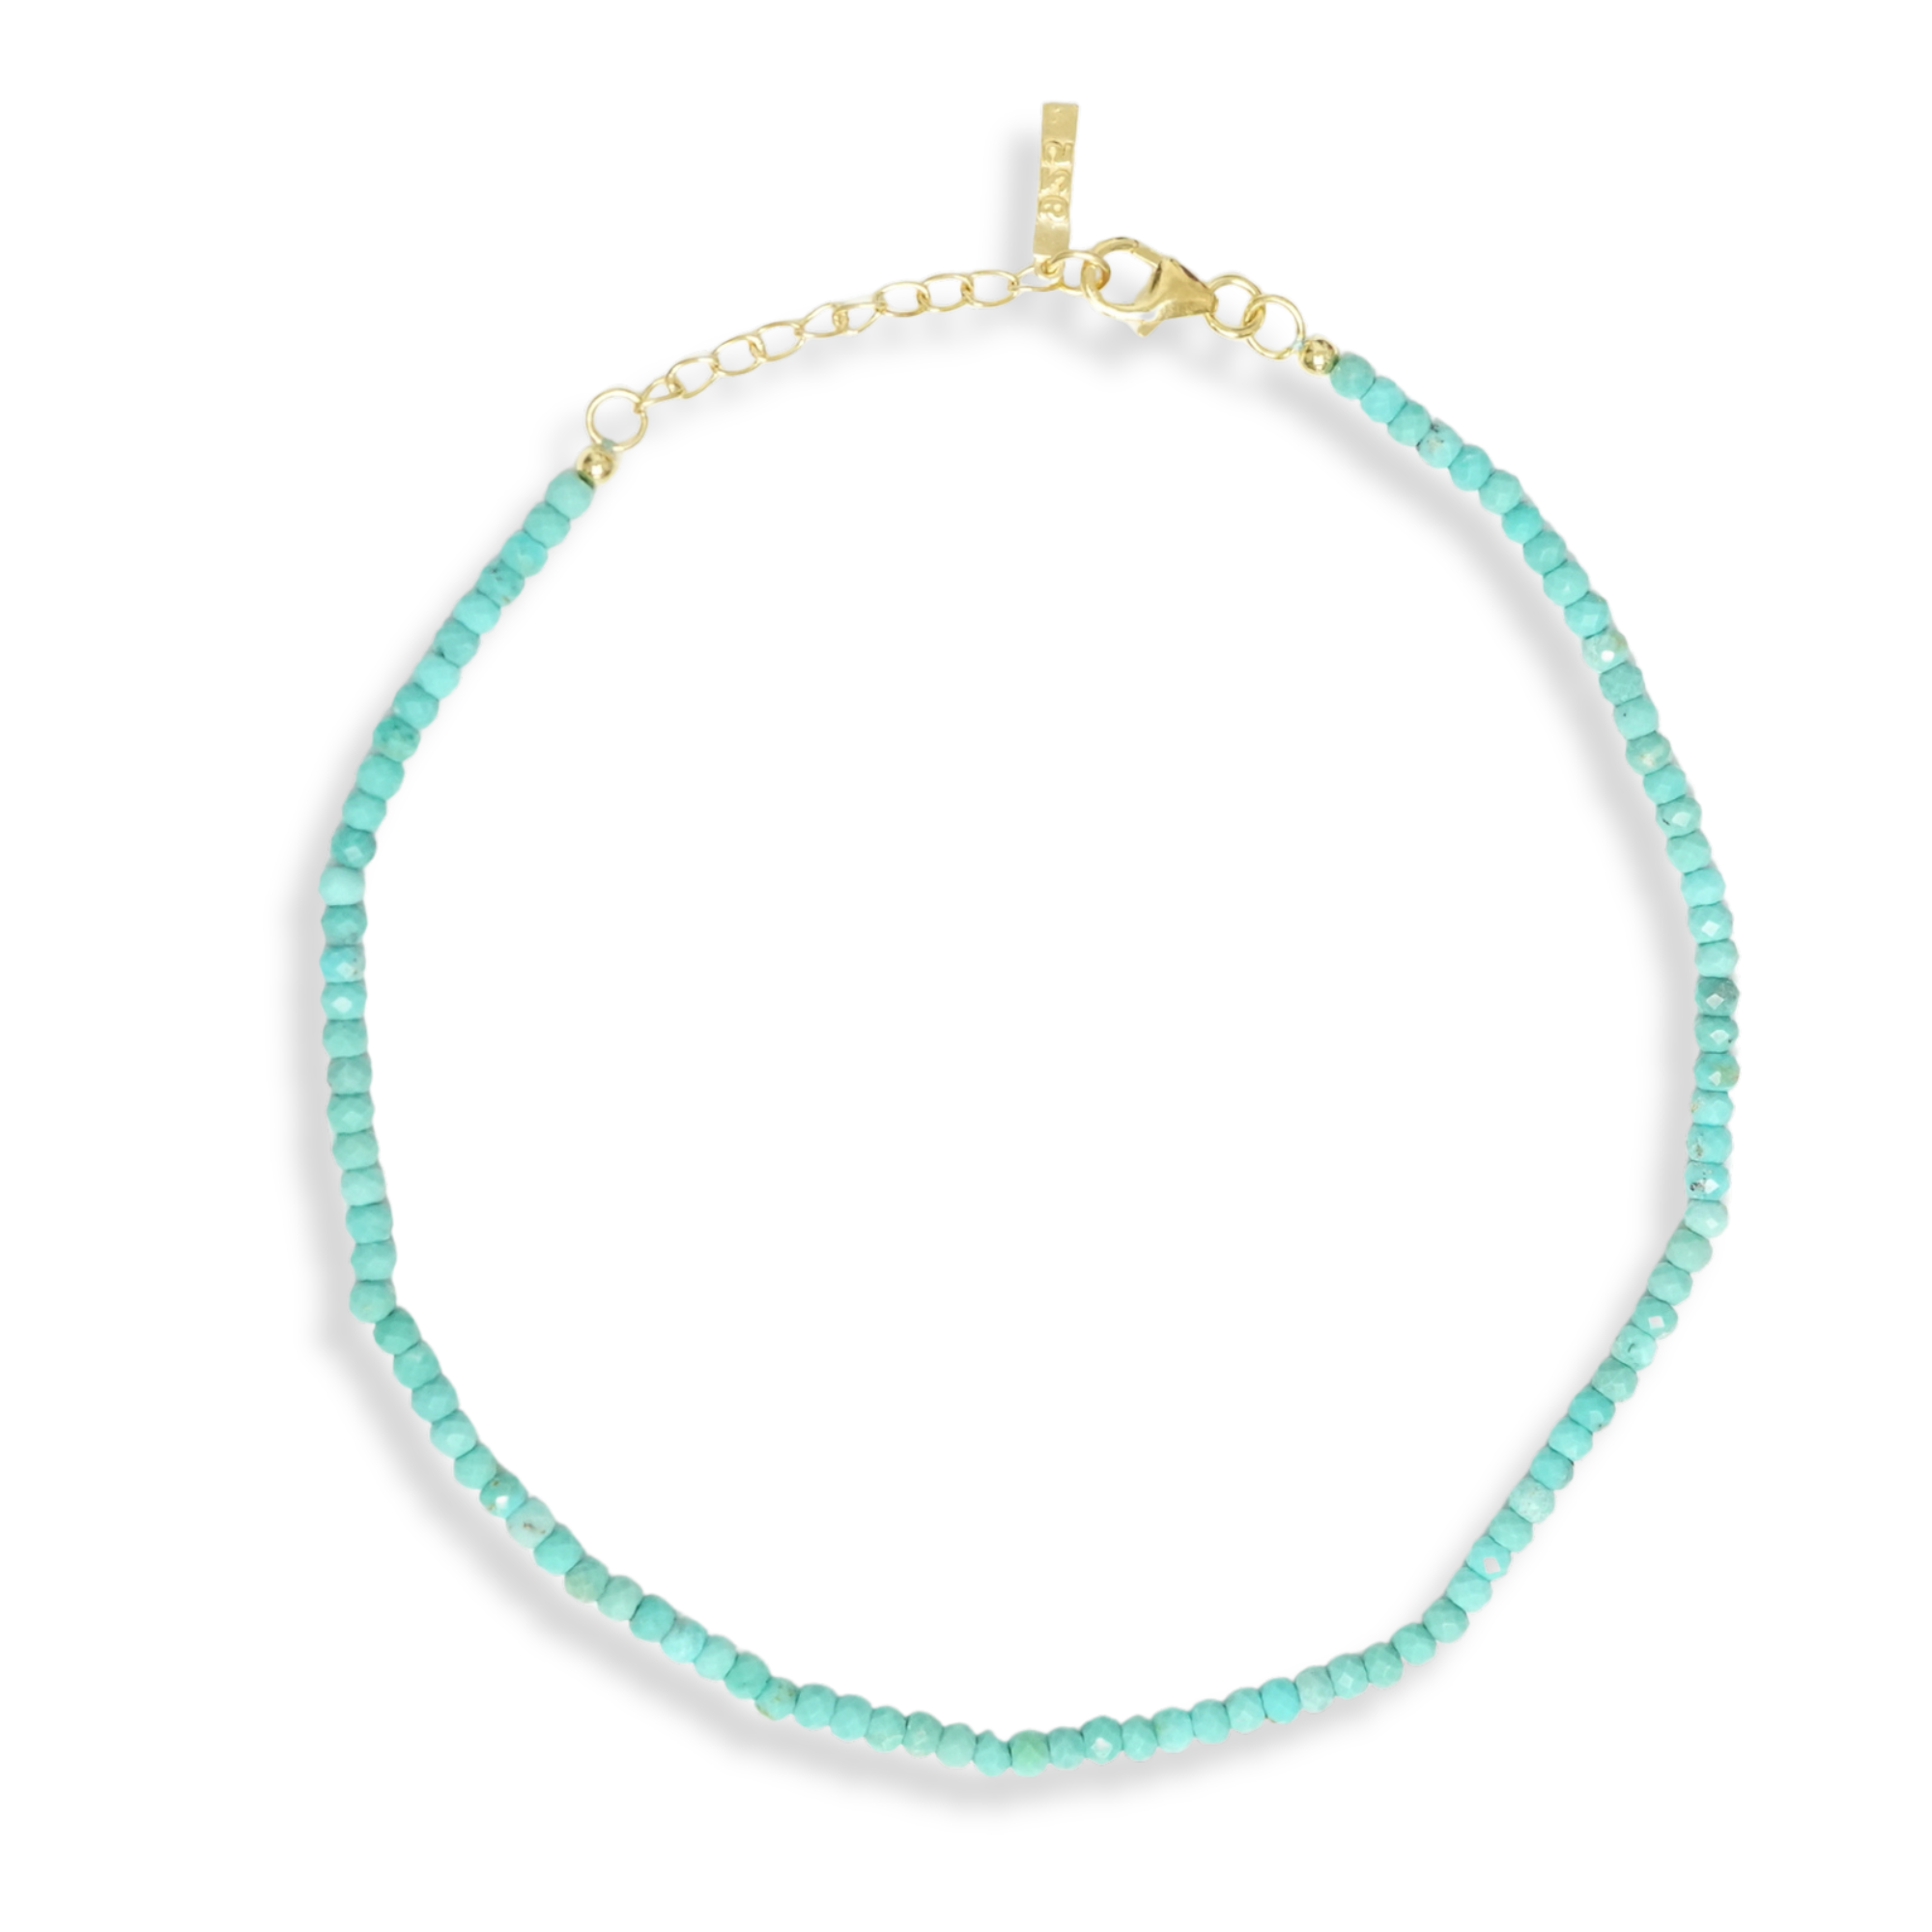 THE EVERLY ANKLET